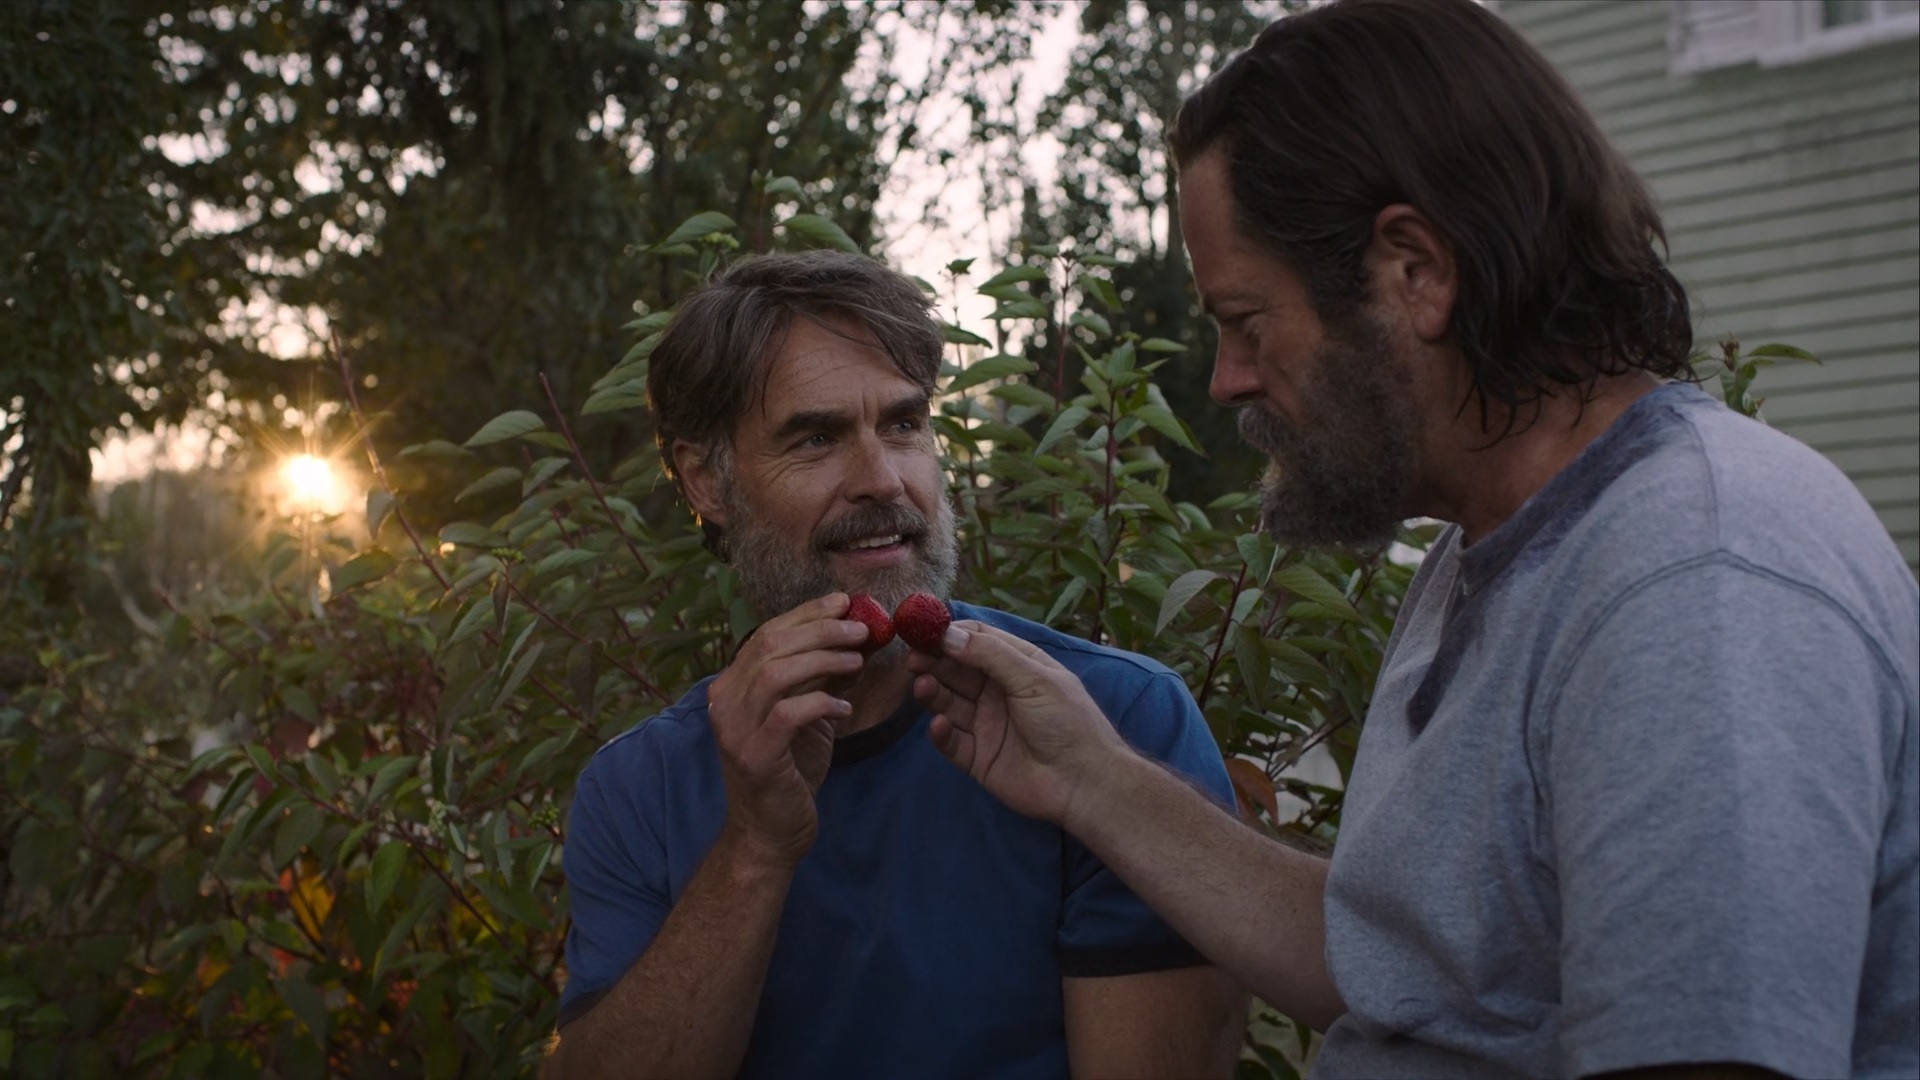 Bill and Frank "toasting" with strawberries in The Last of Us.